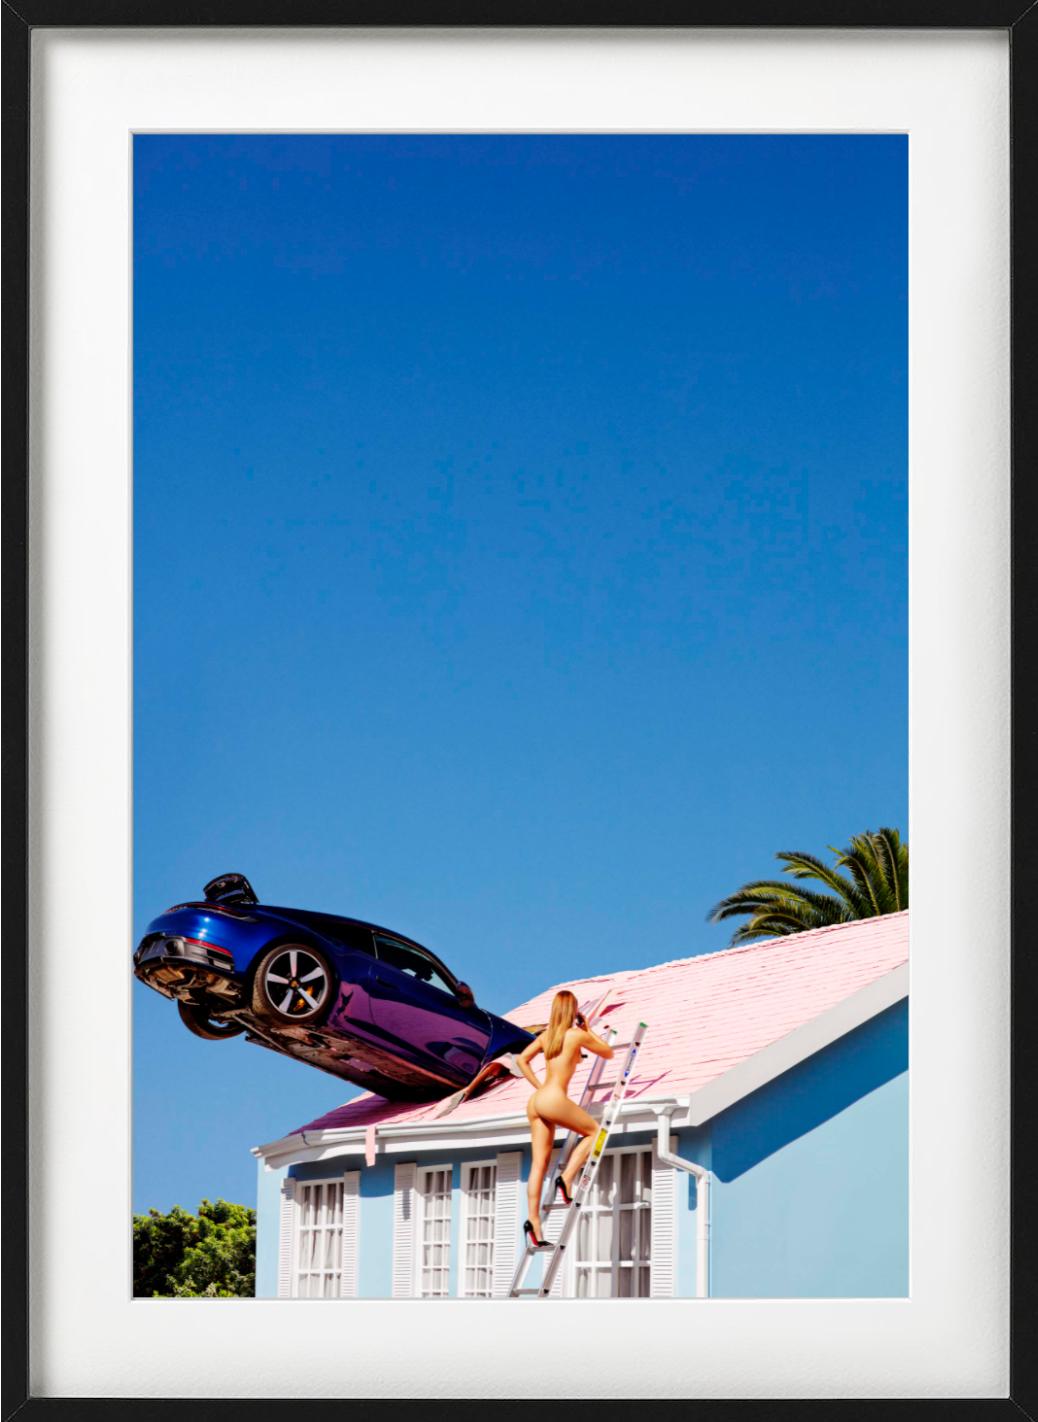 Rooftop Parking - nude on a rooftop with purple car, fine art photography, 2012 - Contemporary Photograph by Tony Kelly